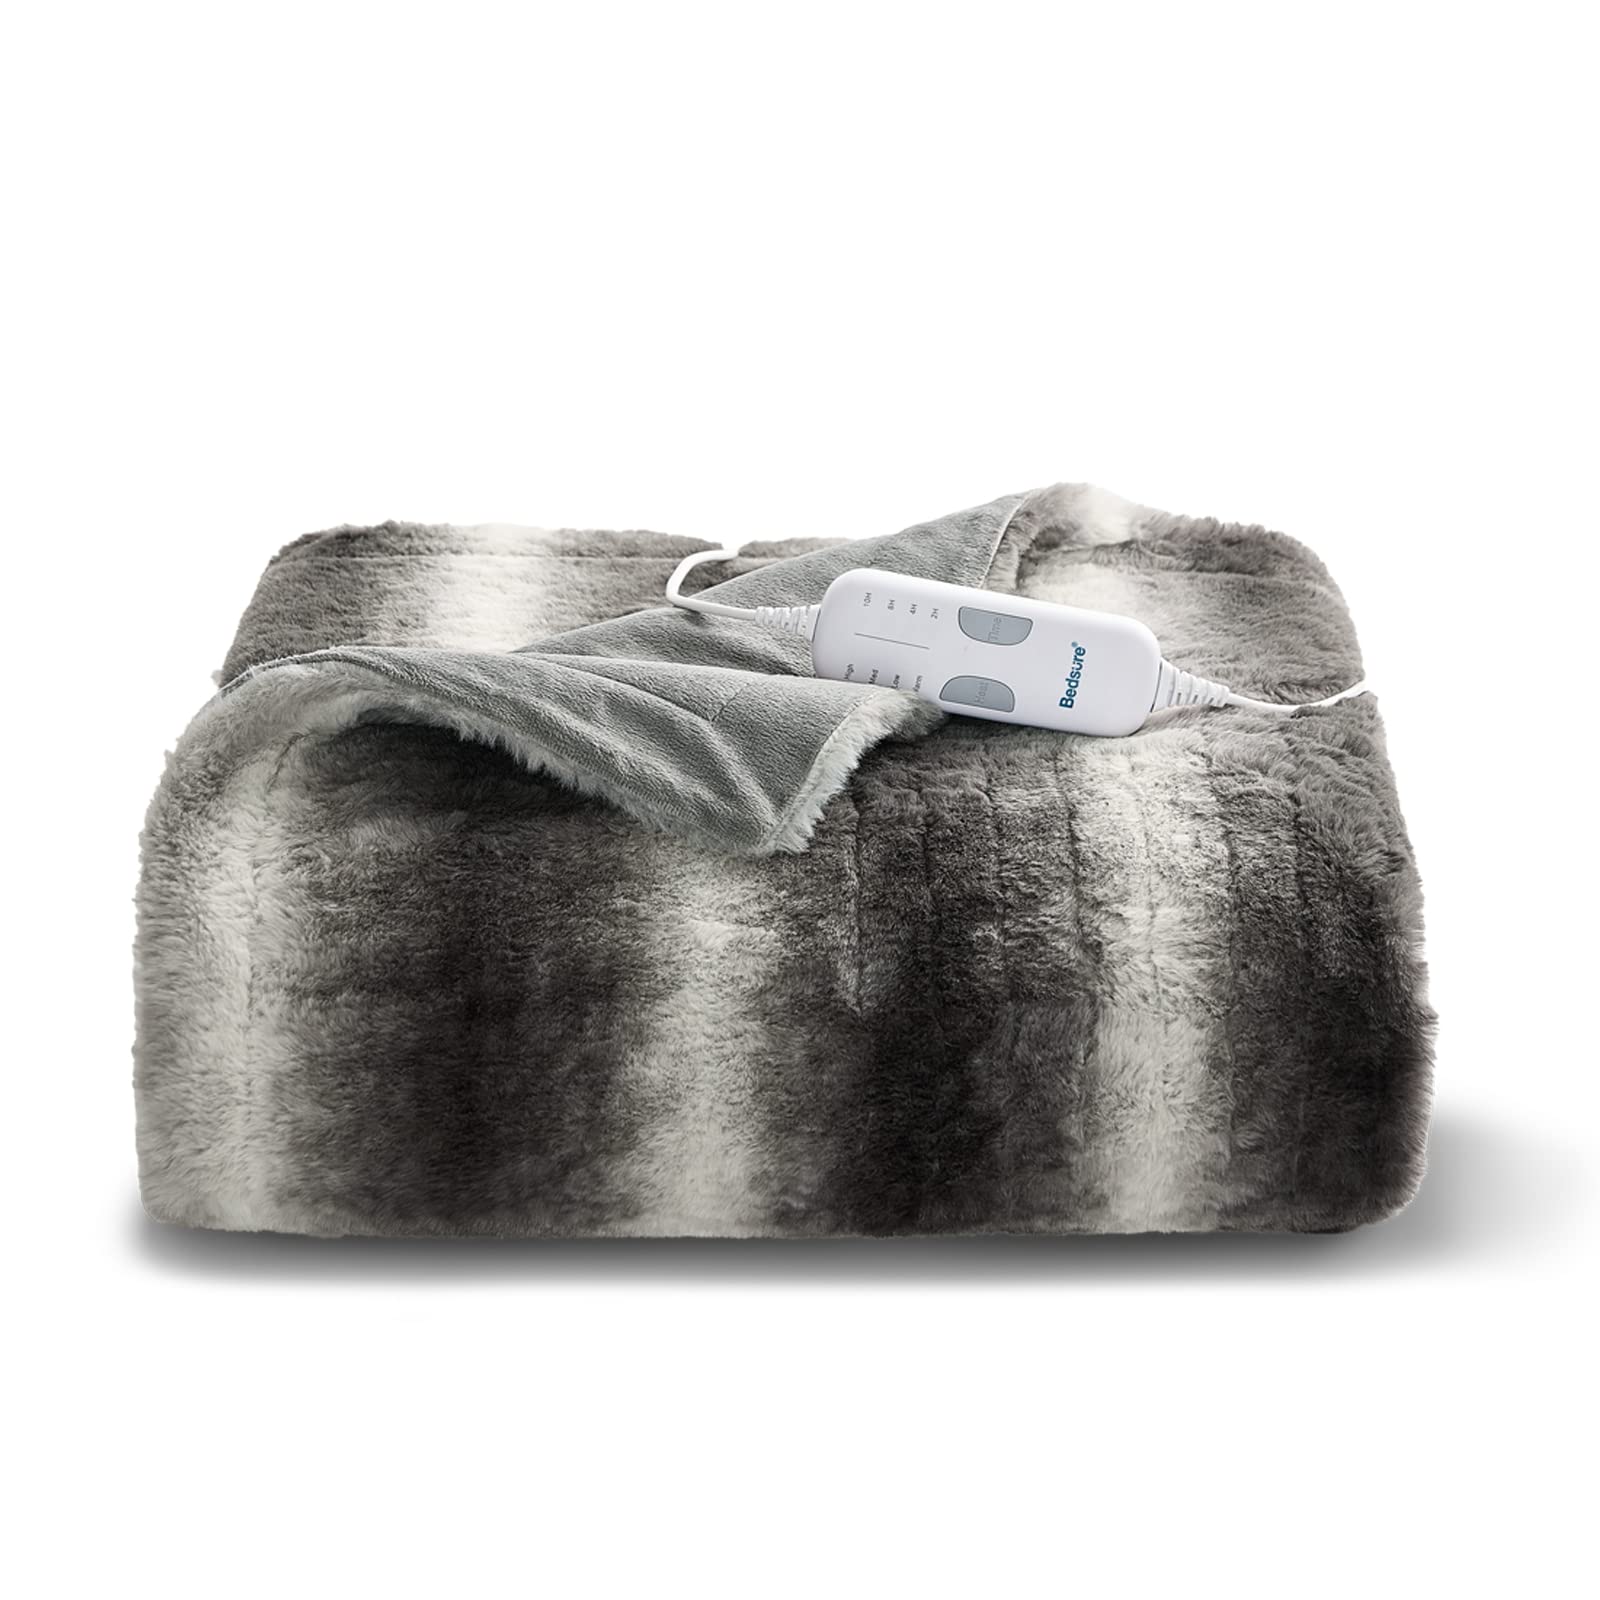 Electric Blanket Heated Throw - 50”×60“ Faux Fur Low Voltage Heated Blanket, 4 Heating Levels & Auto Shut-Off with 2, 4, 8, 10 Hour Timer, Embossed...